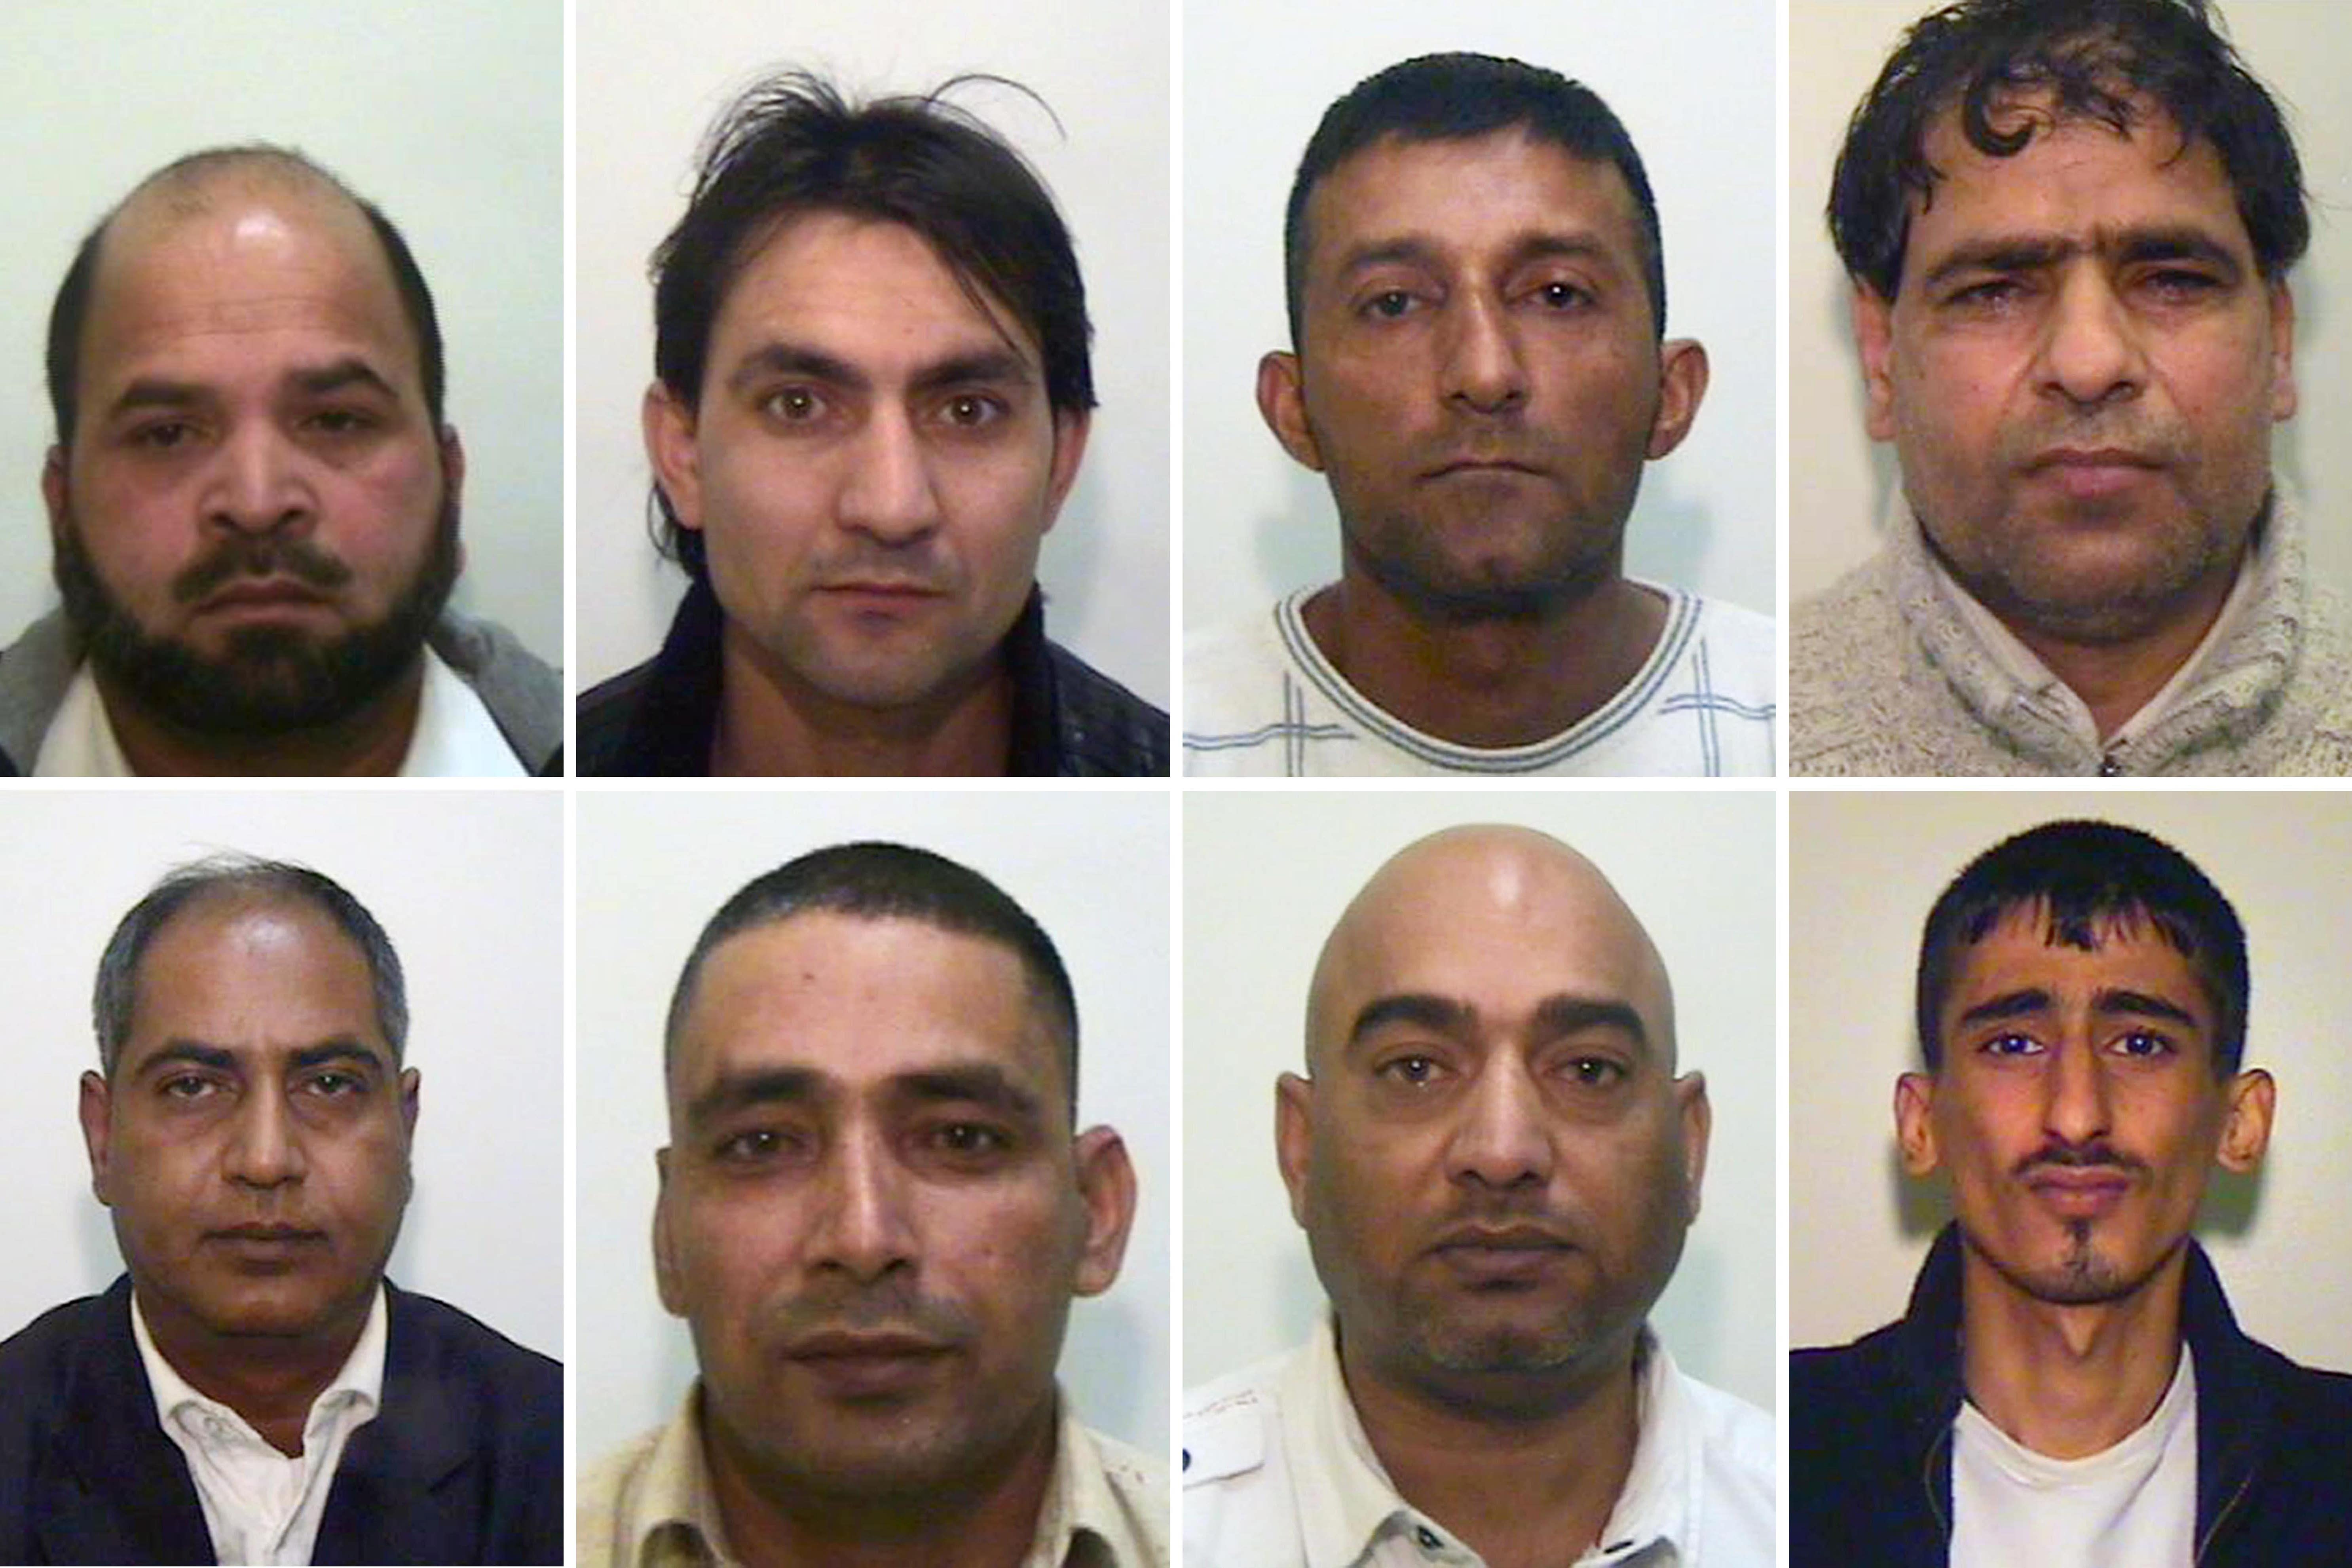 Undated handout composite photo issued by Greater Manchester Police of (top row left to right) Abdul Rauf, Hamid Safi, Mohammed Sajid and Abdul Aziz; (Bottom row left to right) Abdul Qayyum, Adil Khan, Mohammed Amin and Kabeer Hassan who were found guilty of conspiracy and rape.